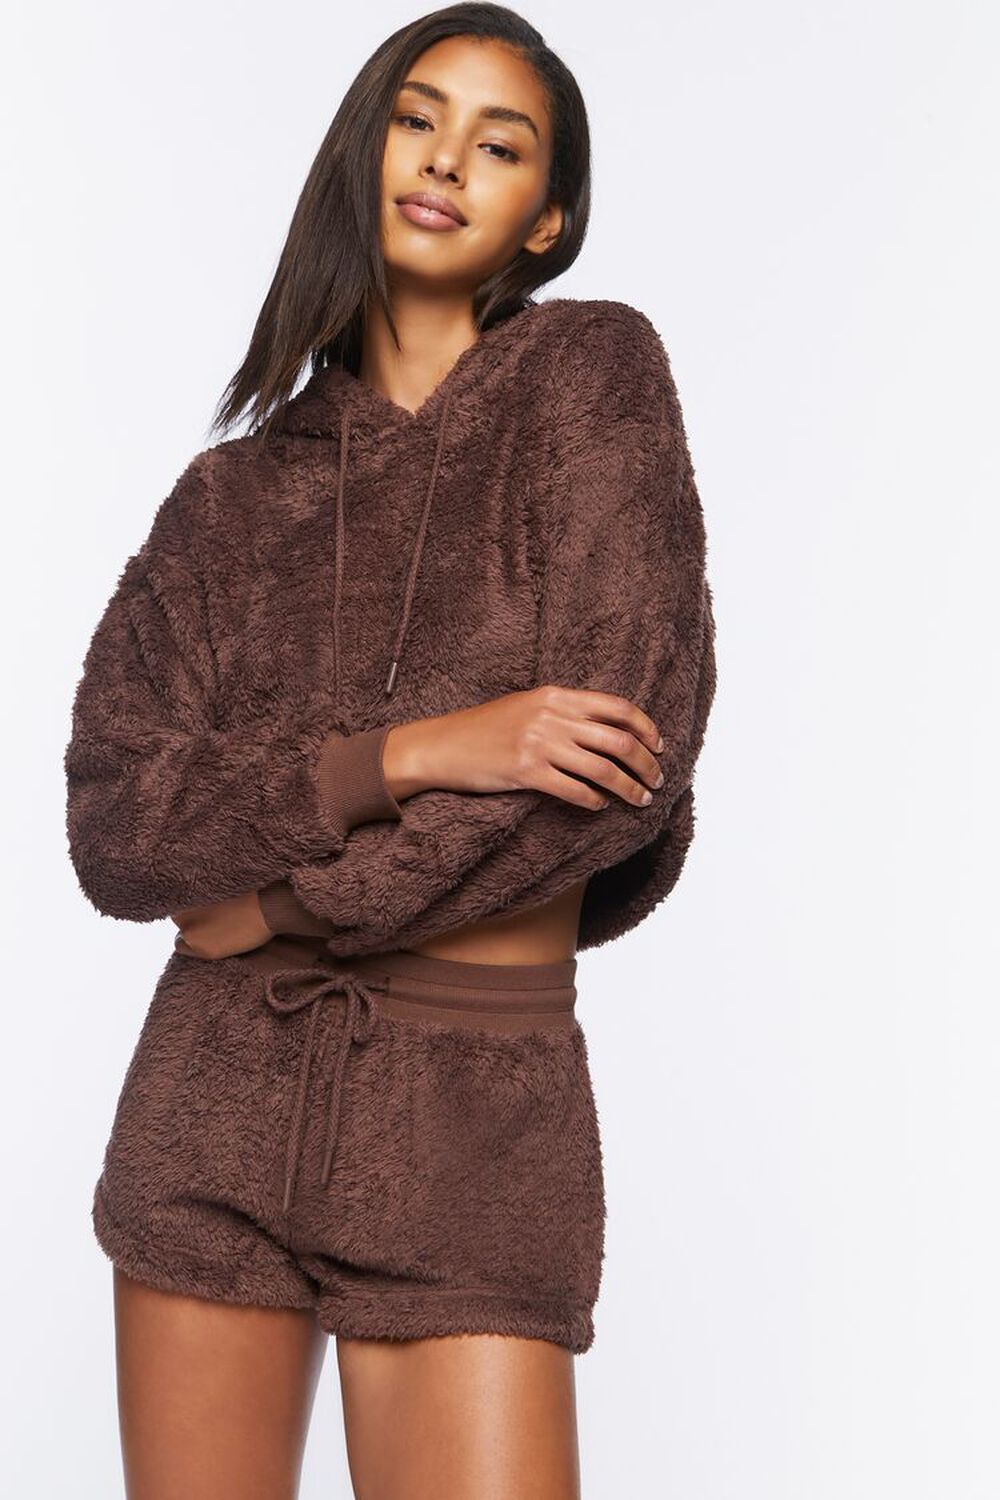 DEEP TAUPE Faux Shearling Lounge Shorts, image 2